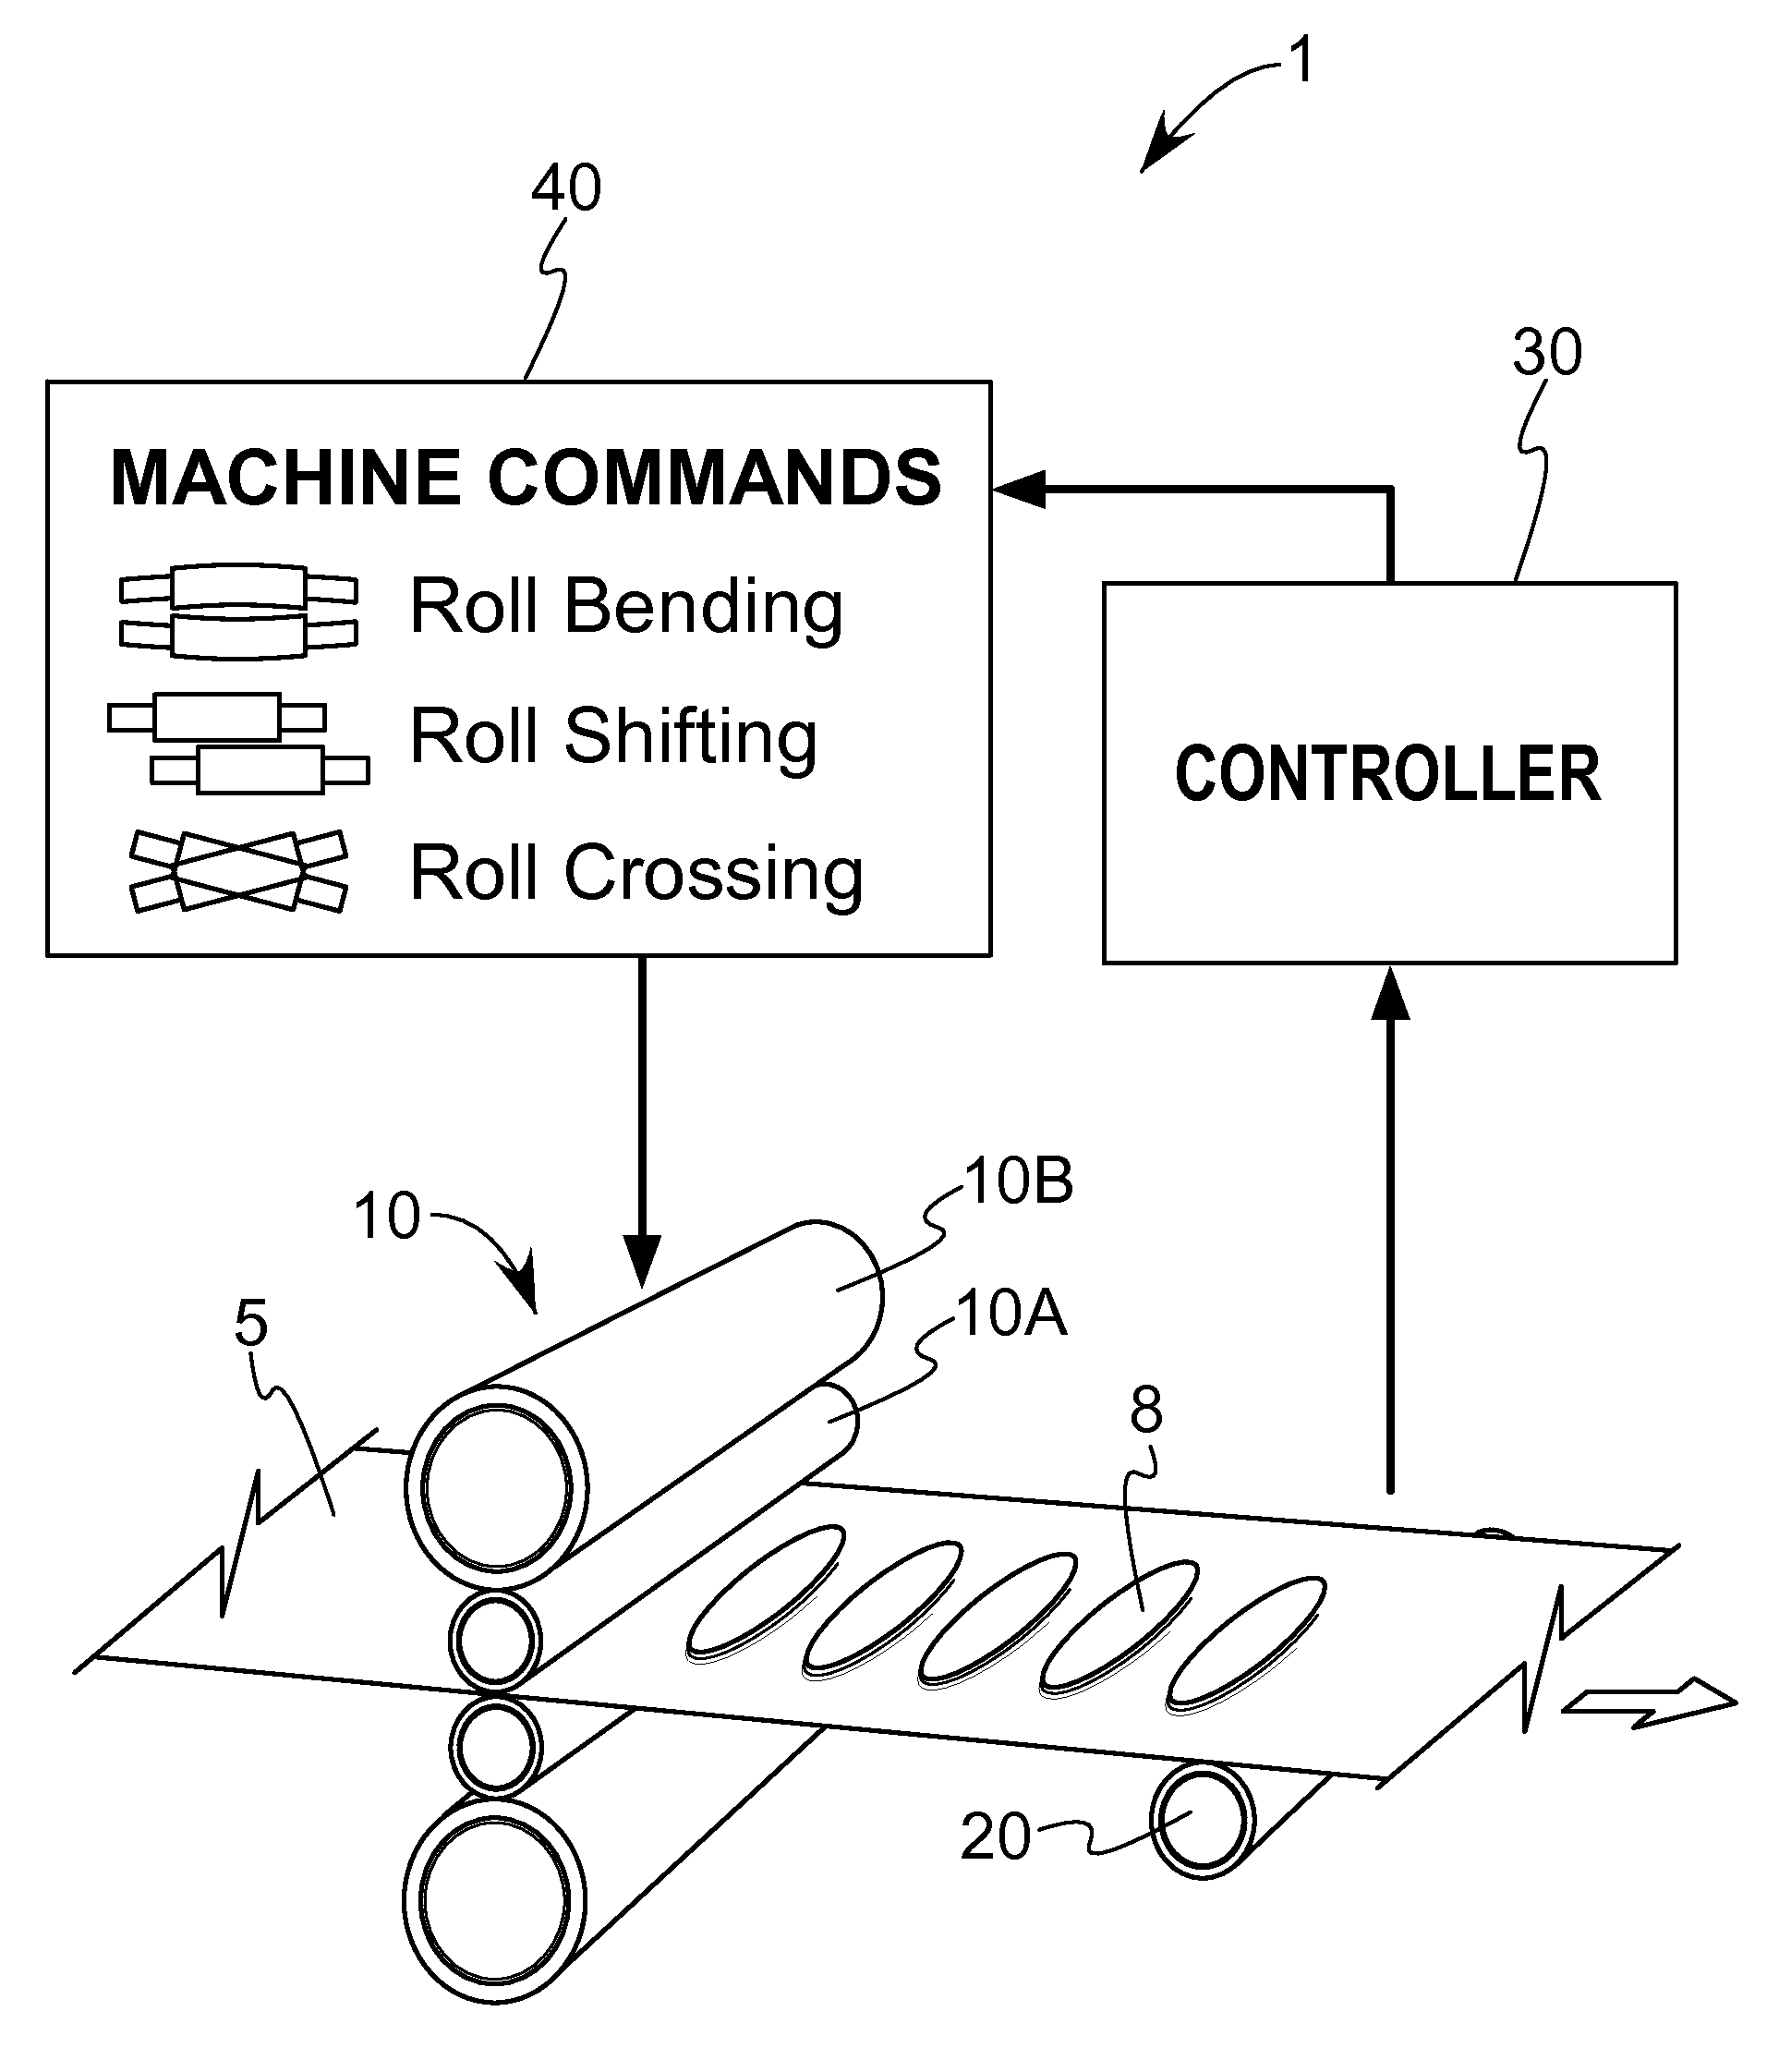 Analytical method for use in optimizing dimensional quality in hot and cold rollling mills